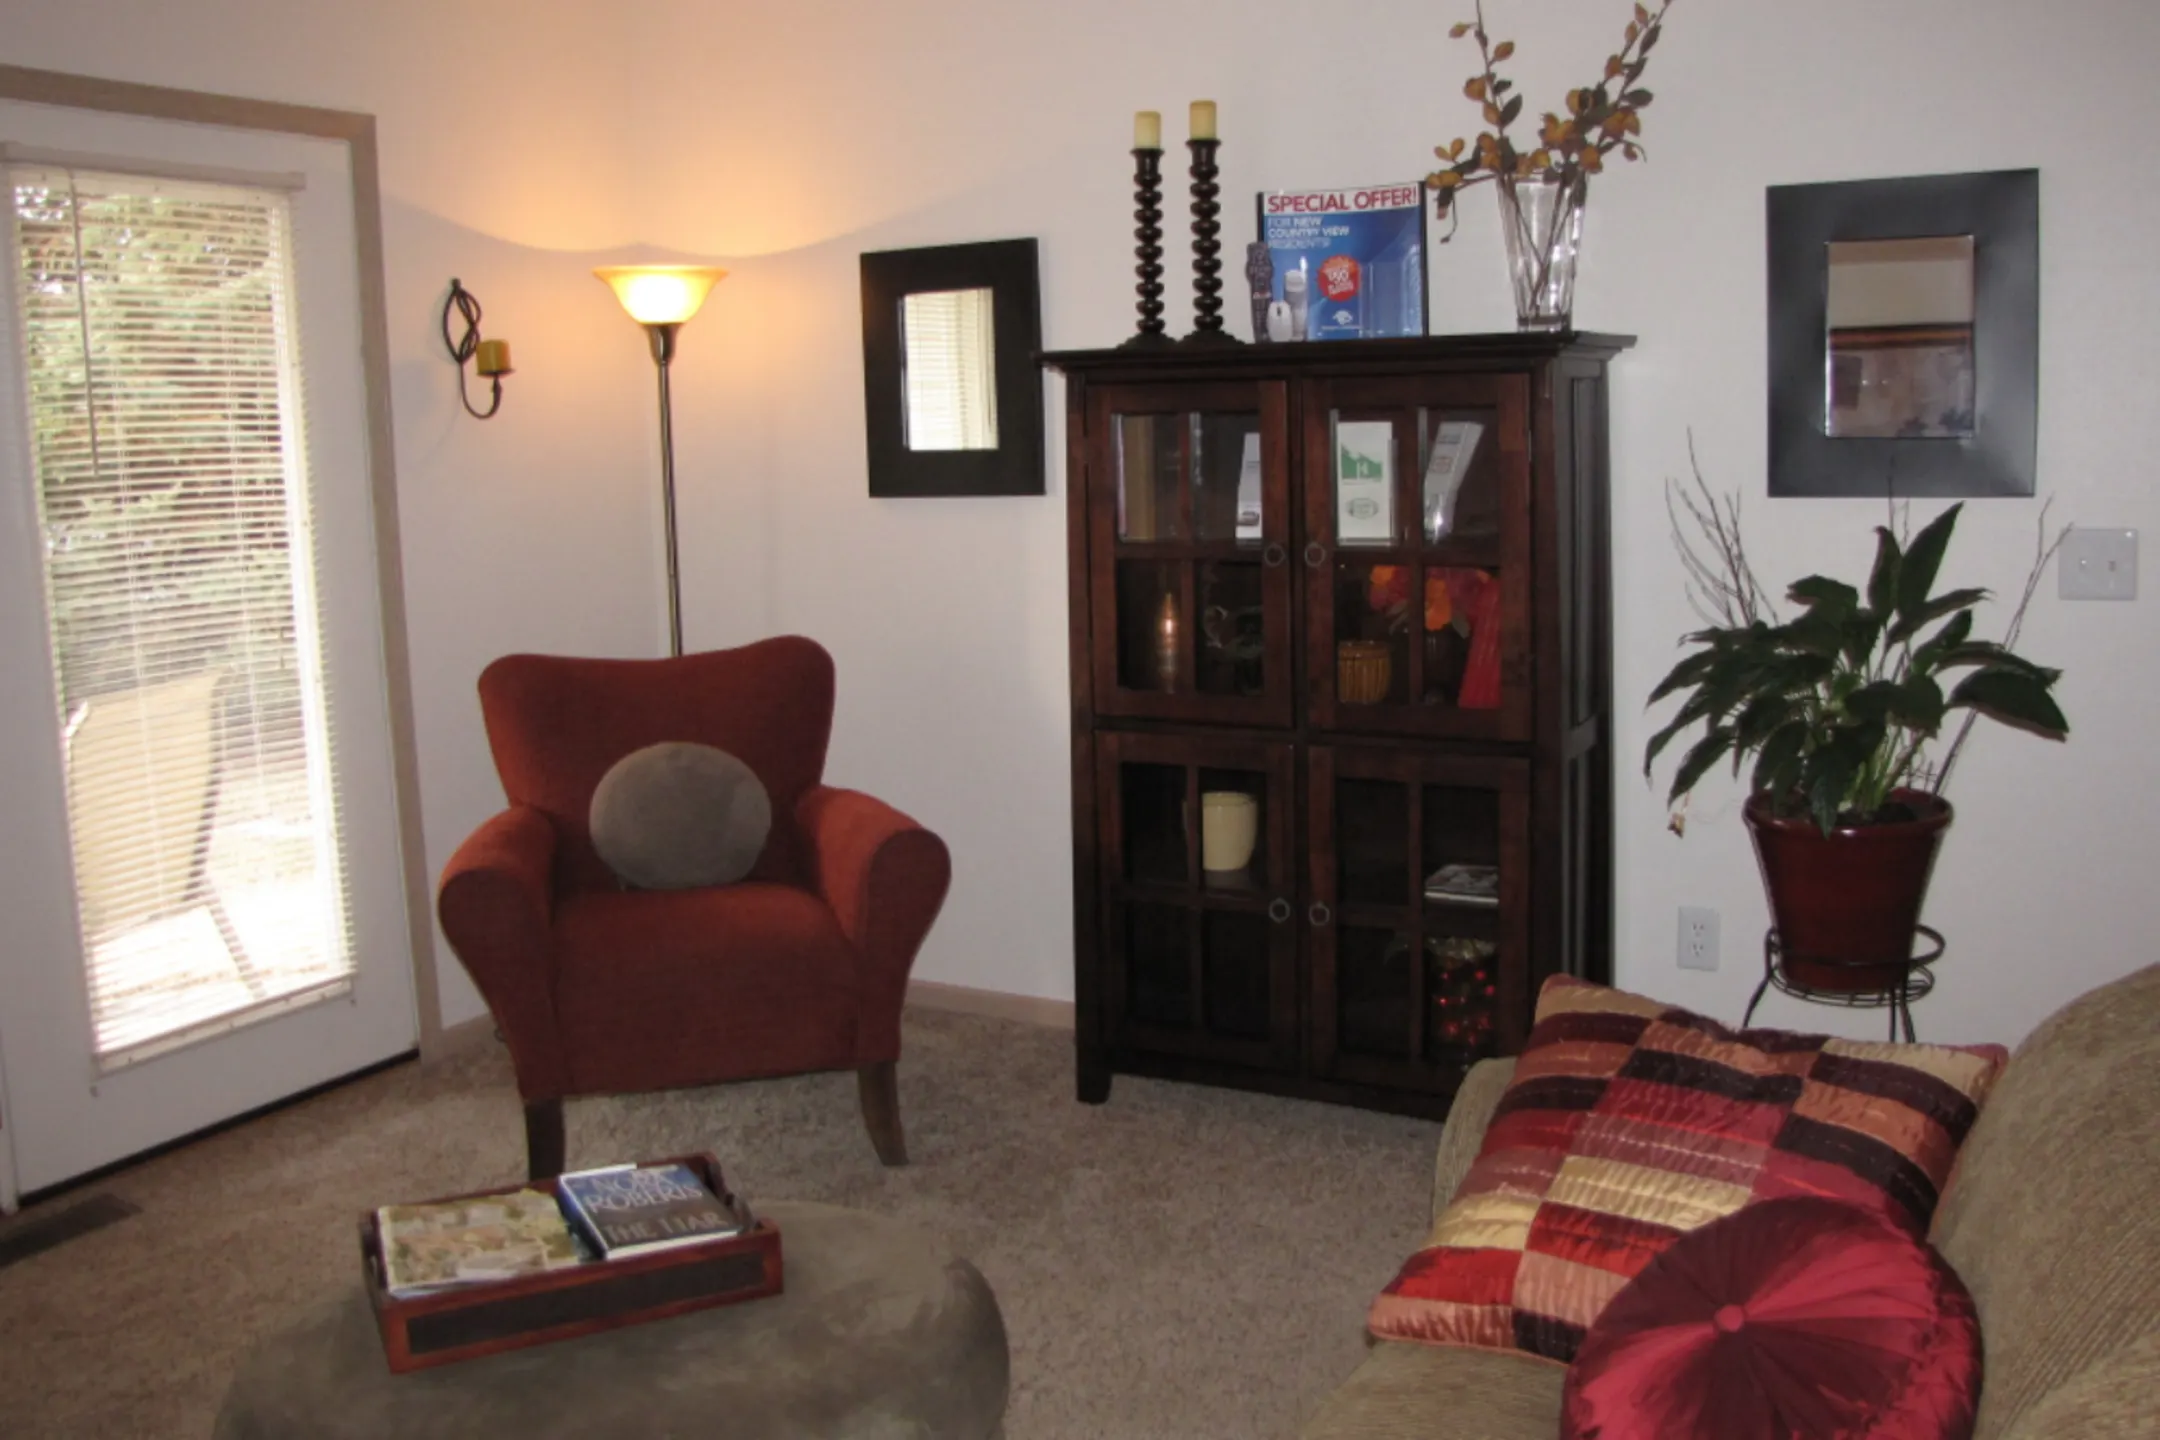 Living Room - Country View Apartments - Toledo, OH